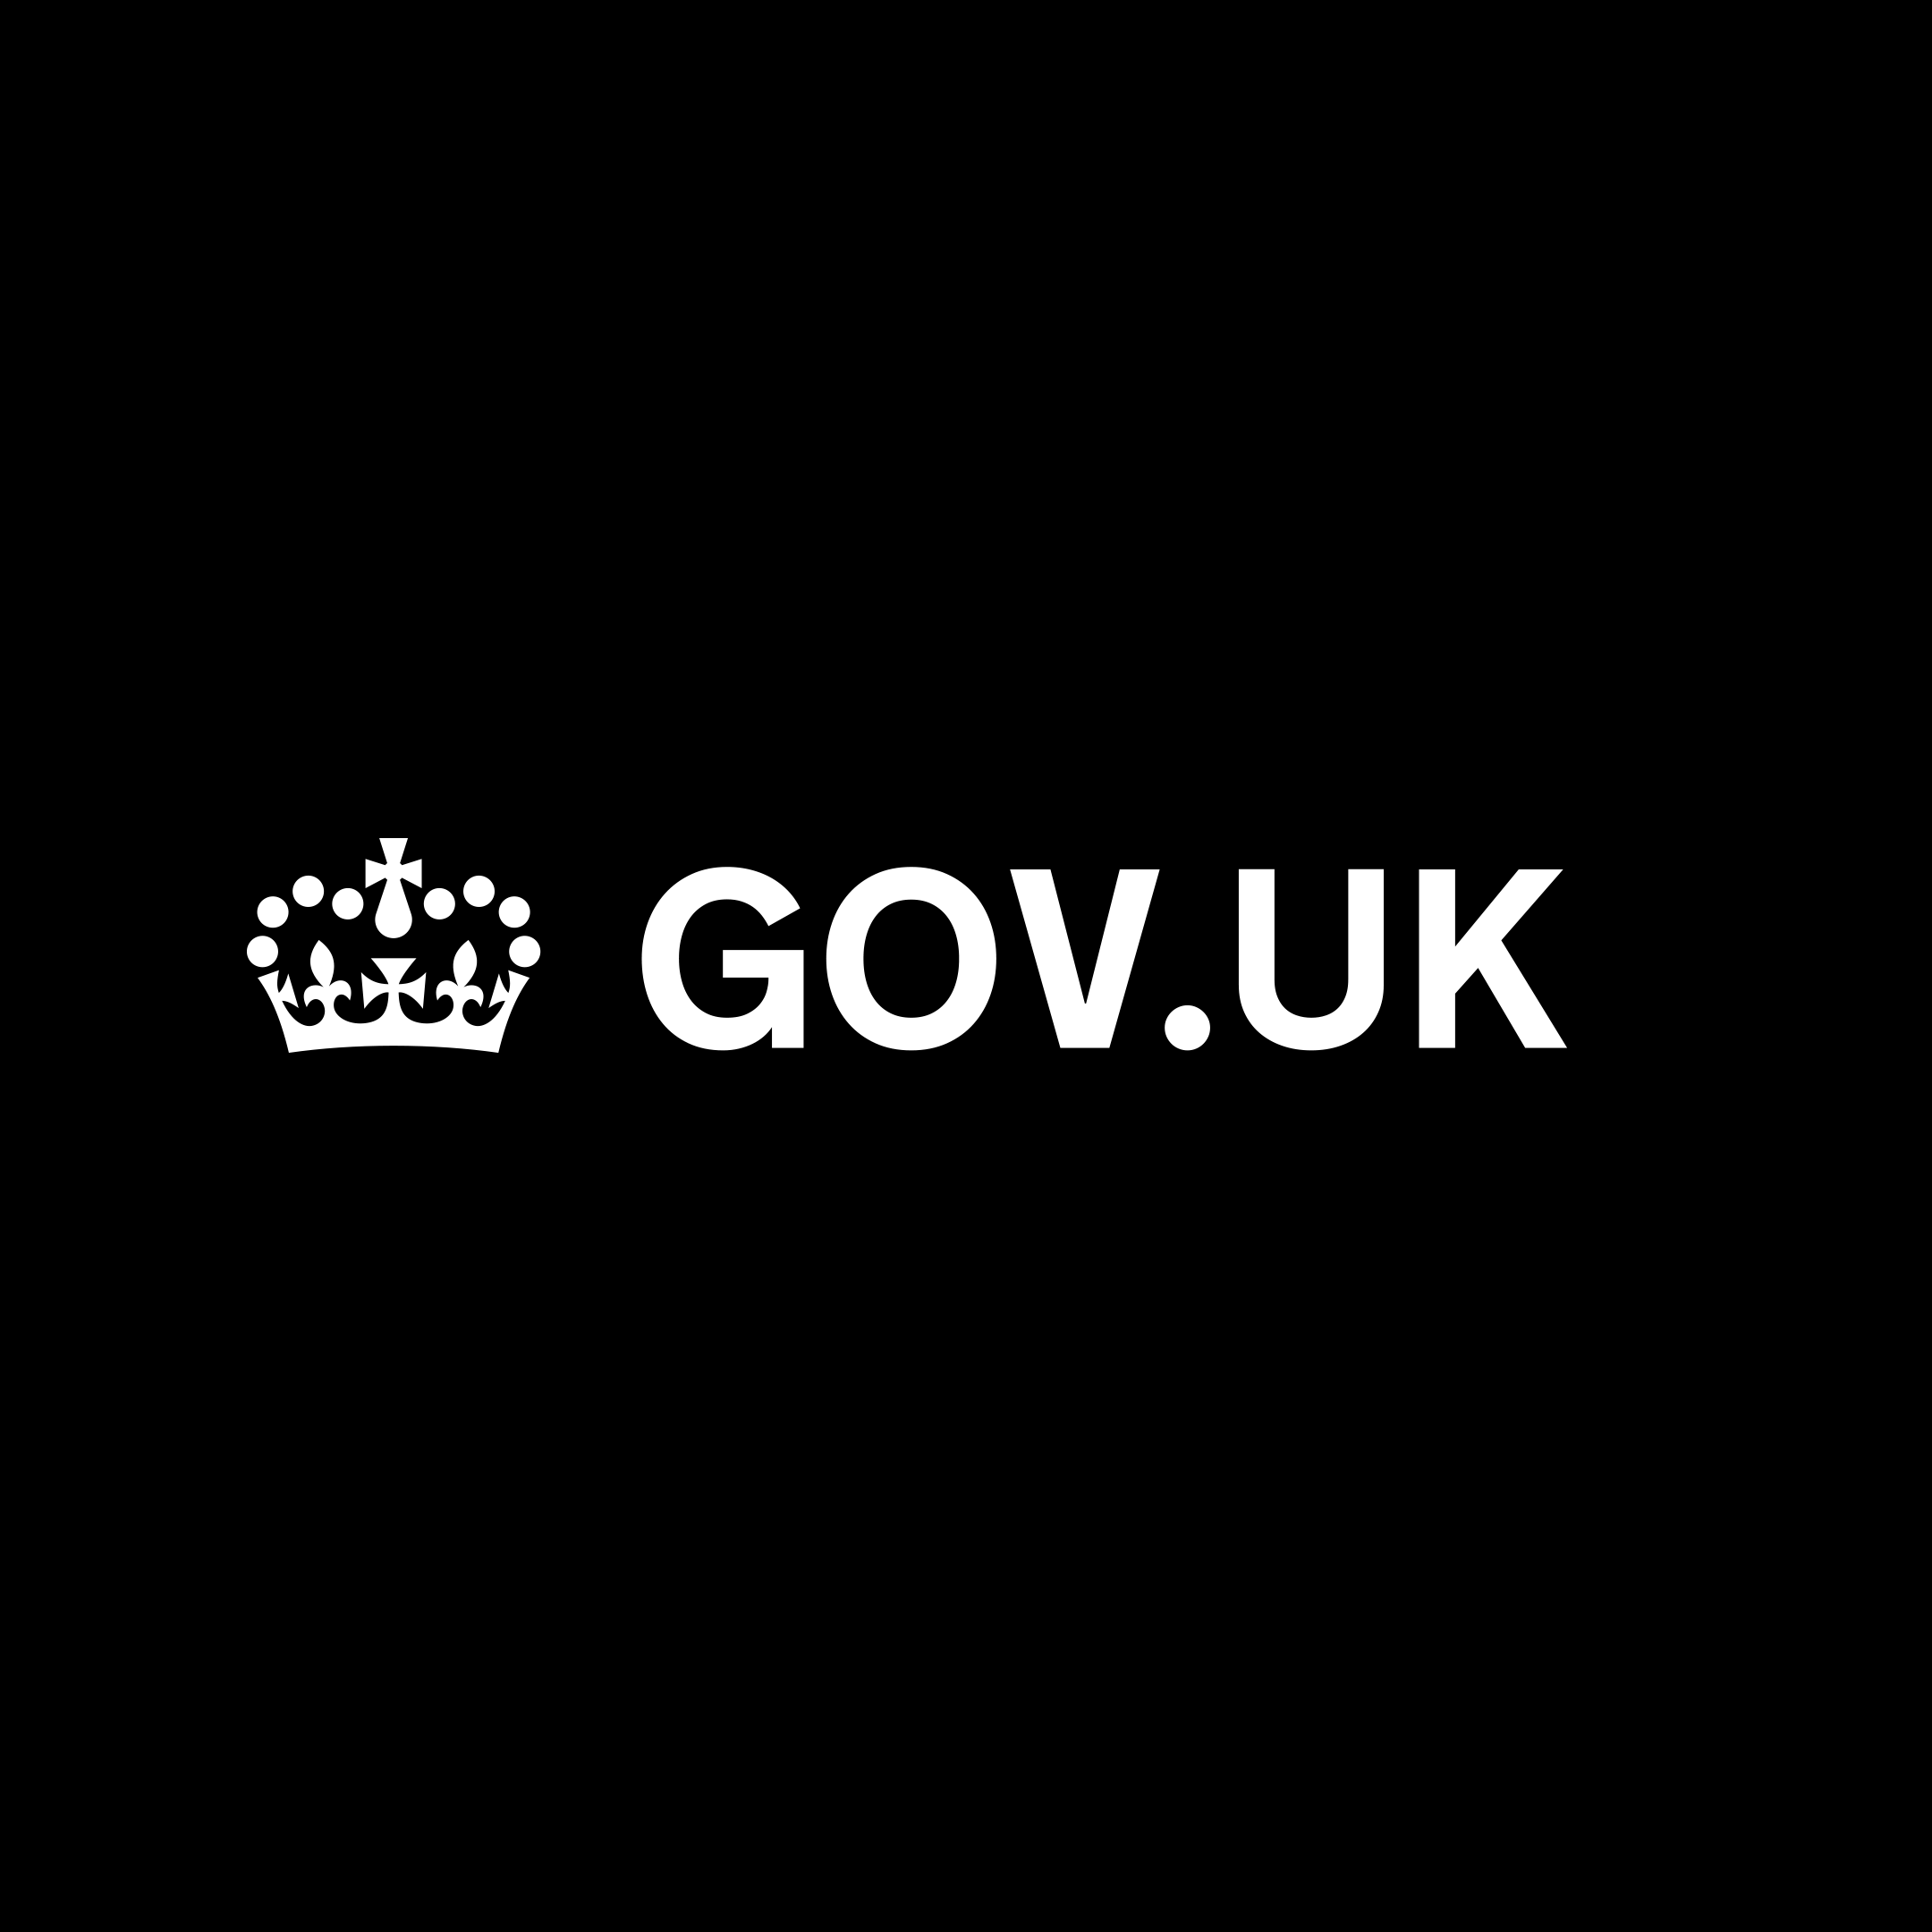 Image of Gov.uk on black background next to the crown